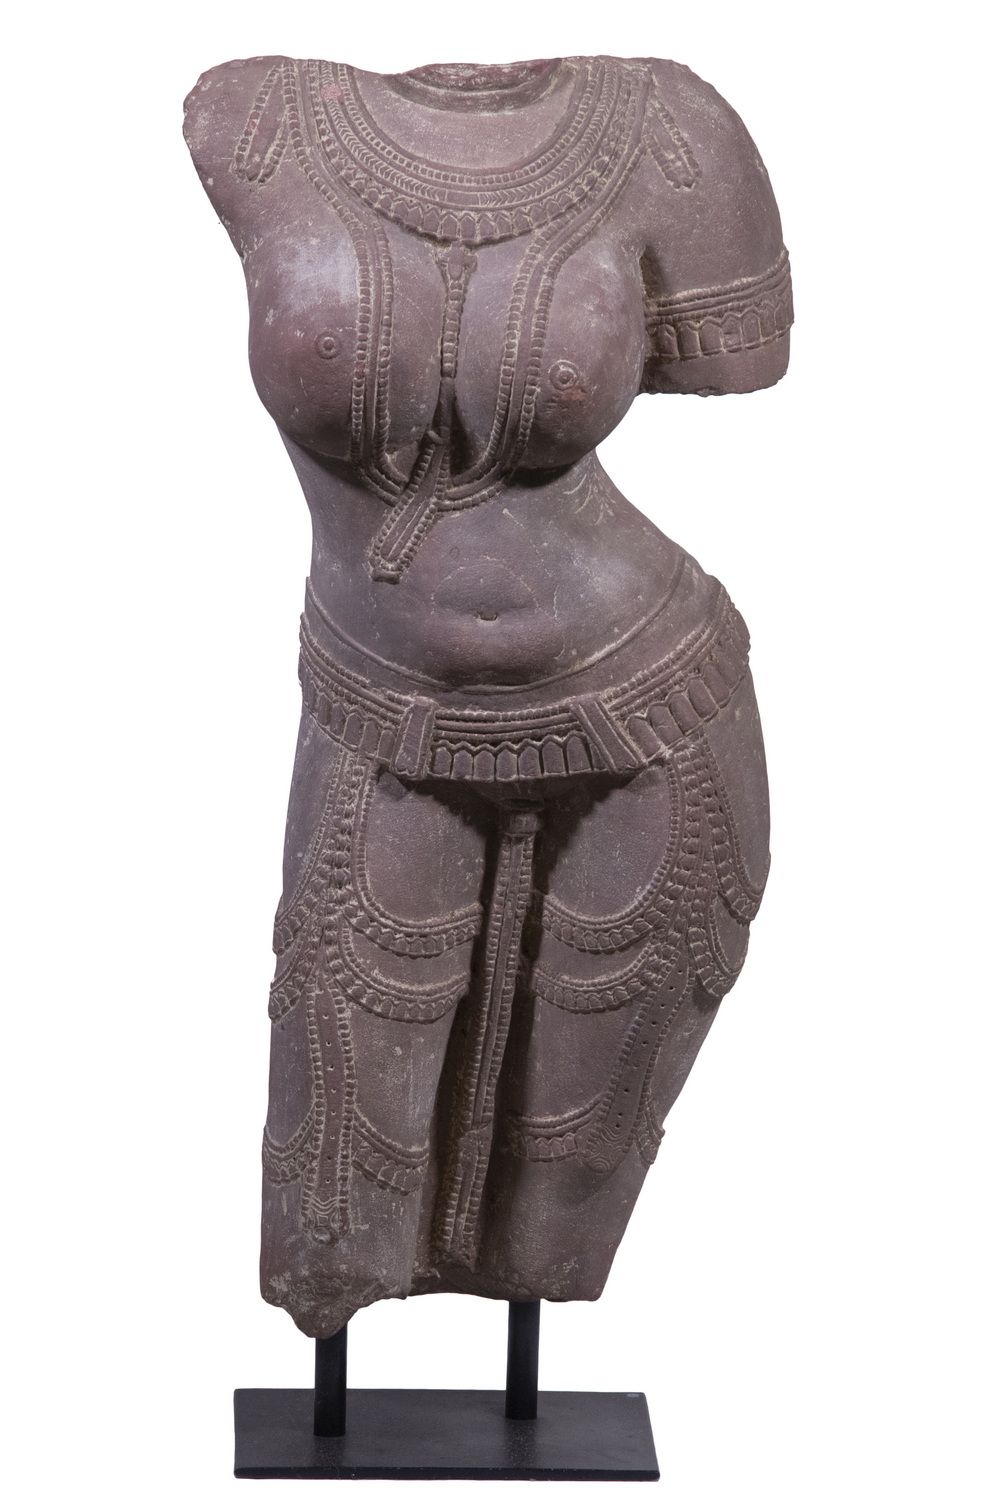 ANCIENT INDIAN STONE FIGURE OF 2b15db